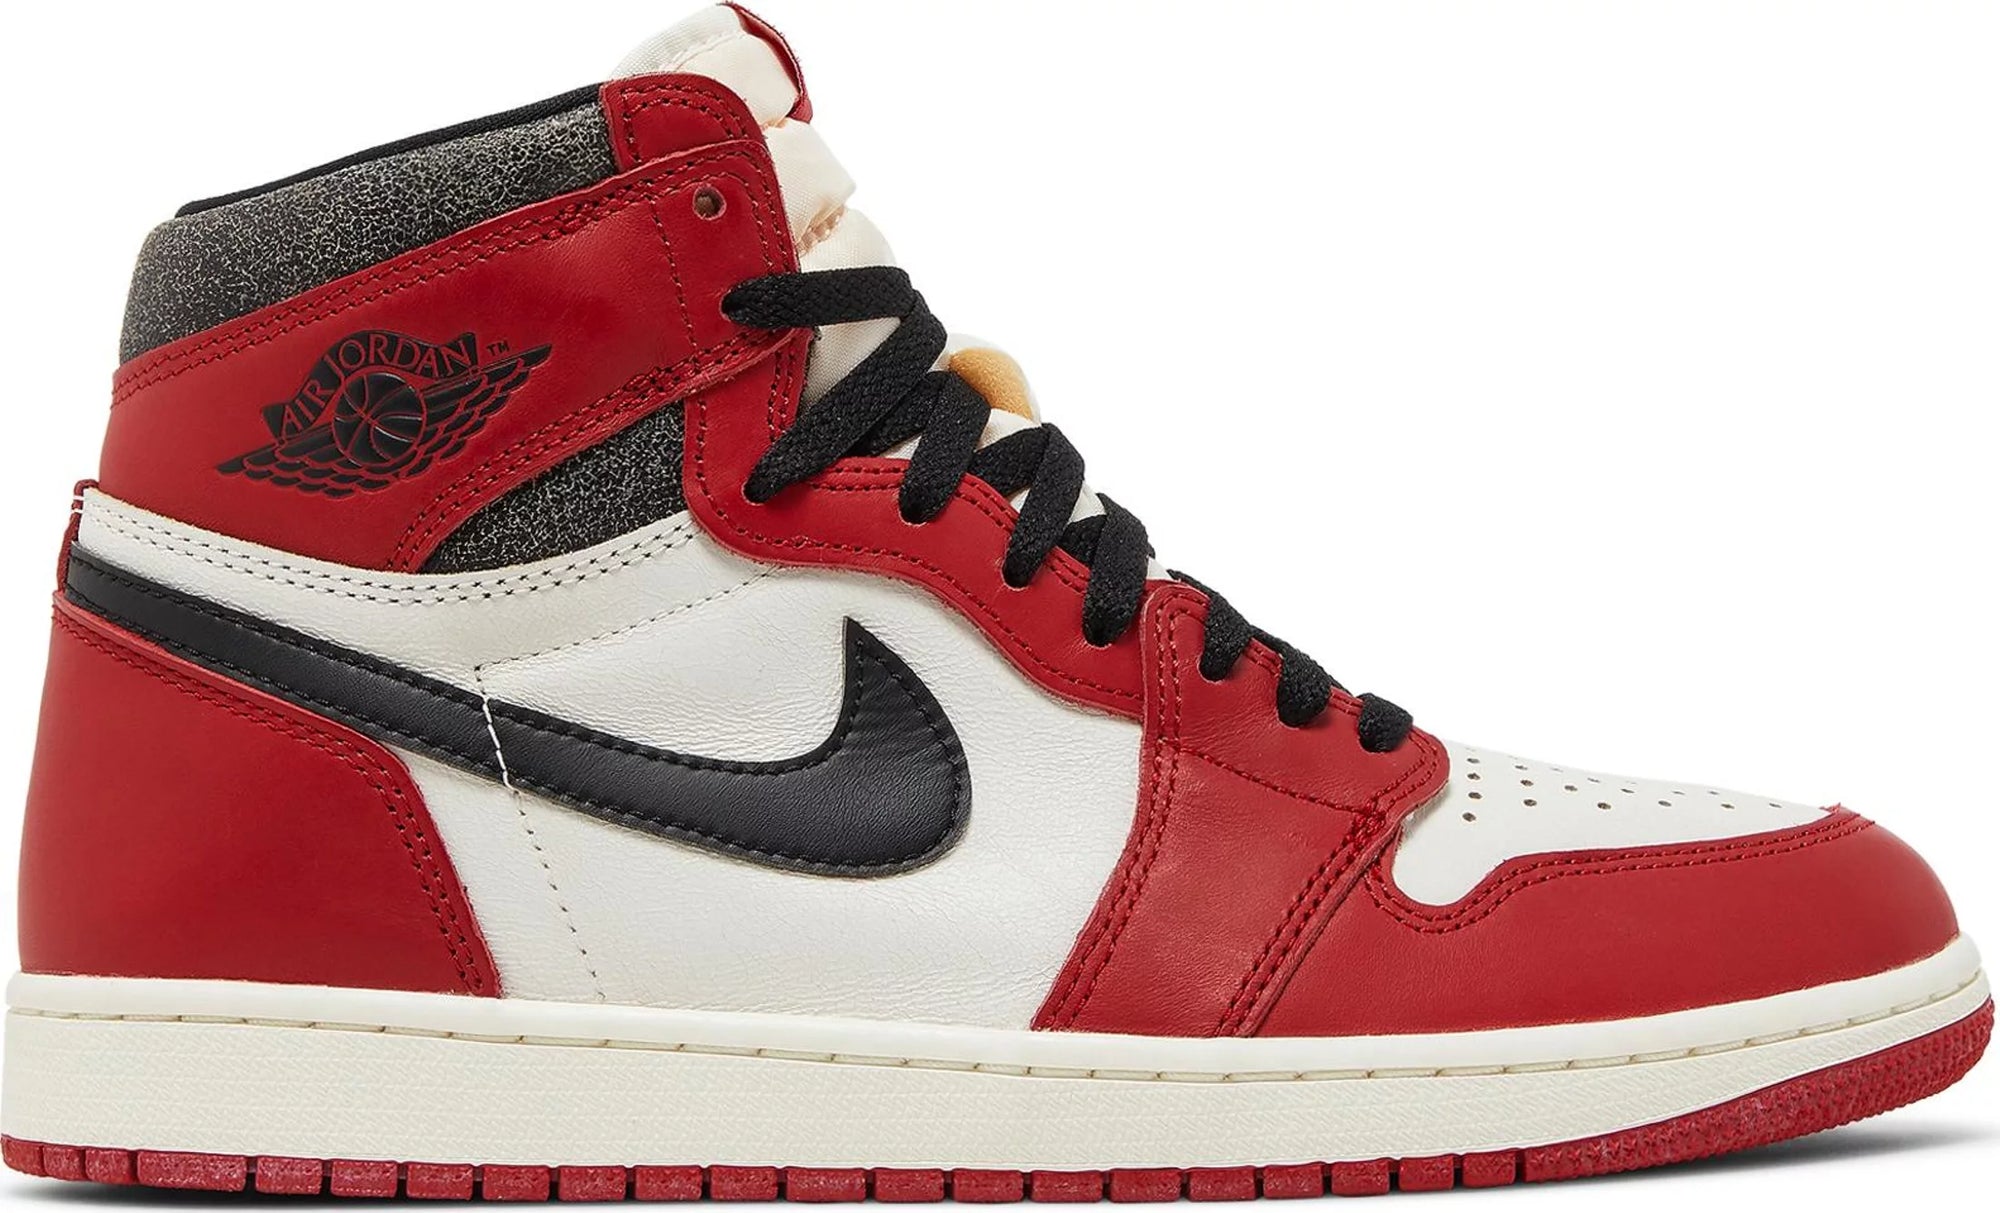 Jordan 1 - Lost and Found